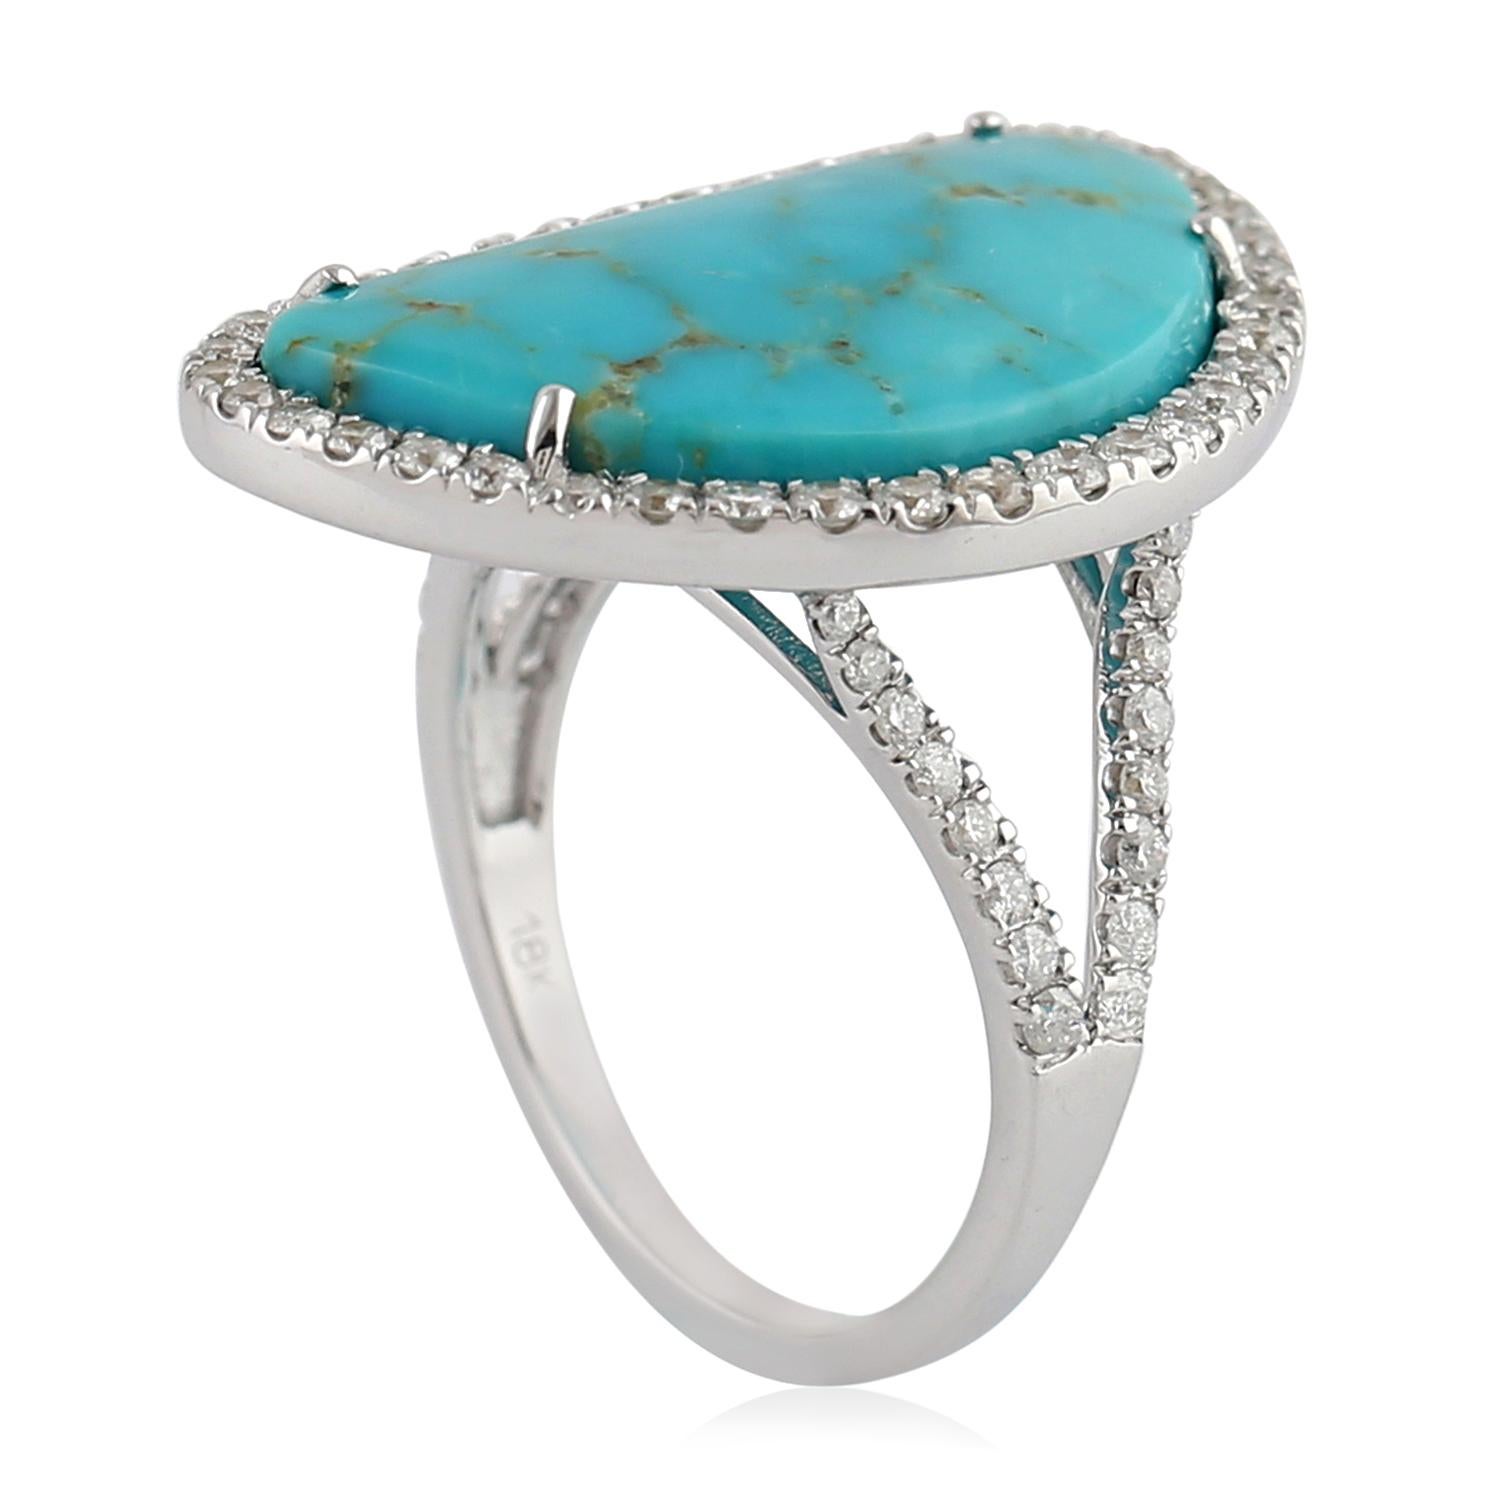 Mixed Cut 7.60ct Natural Turquoise Cocktail Ring With Diamonds Made In 18k White Gold For Sale